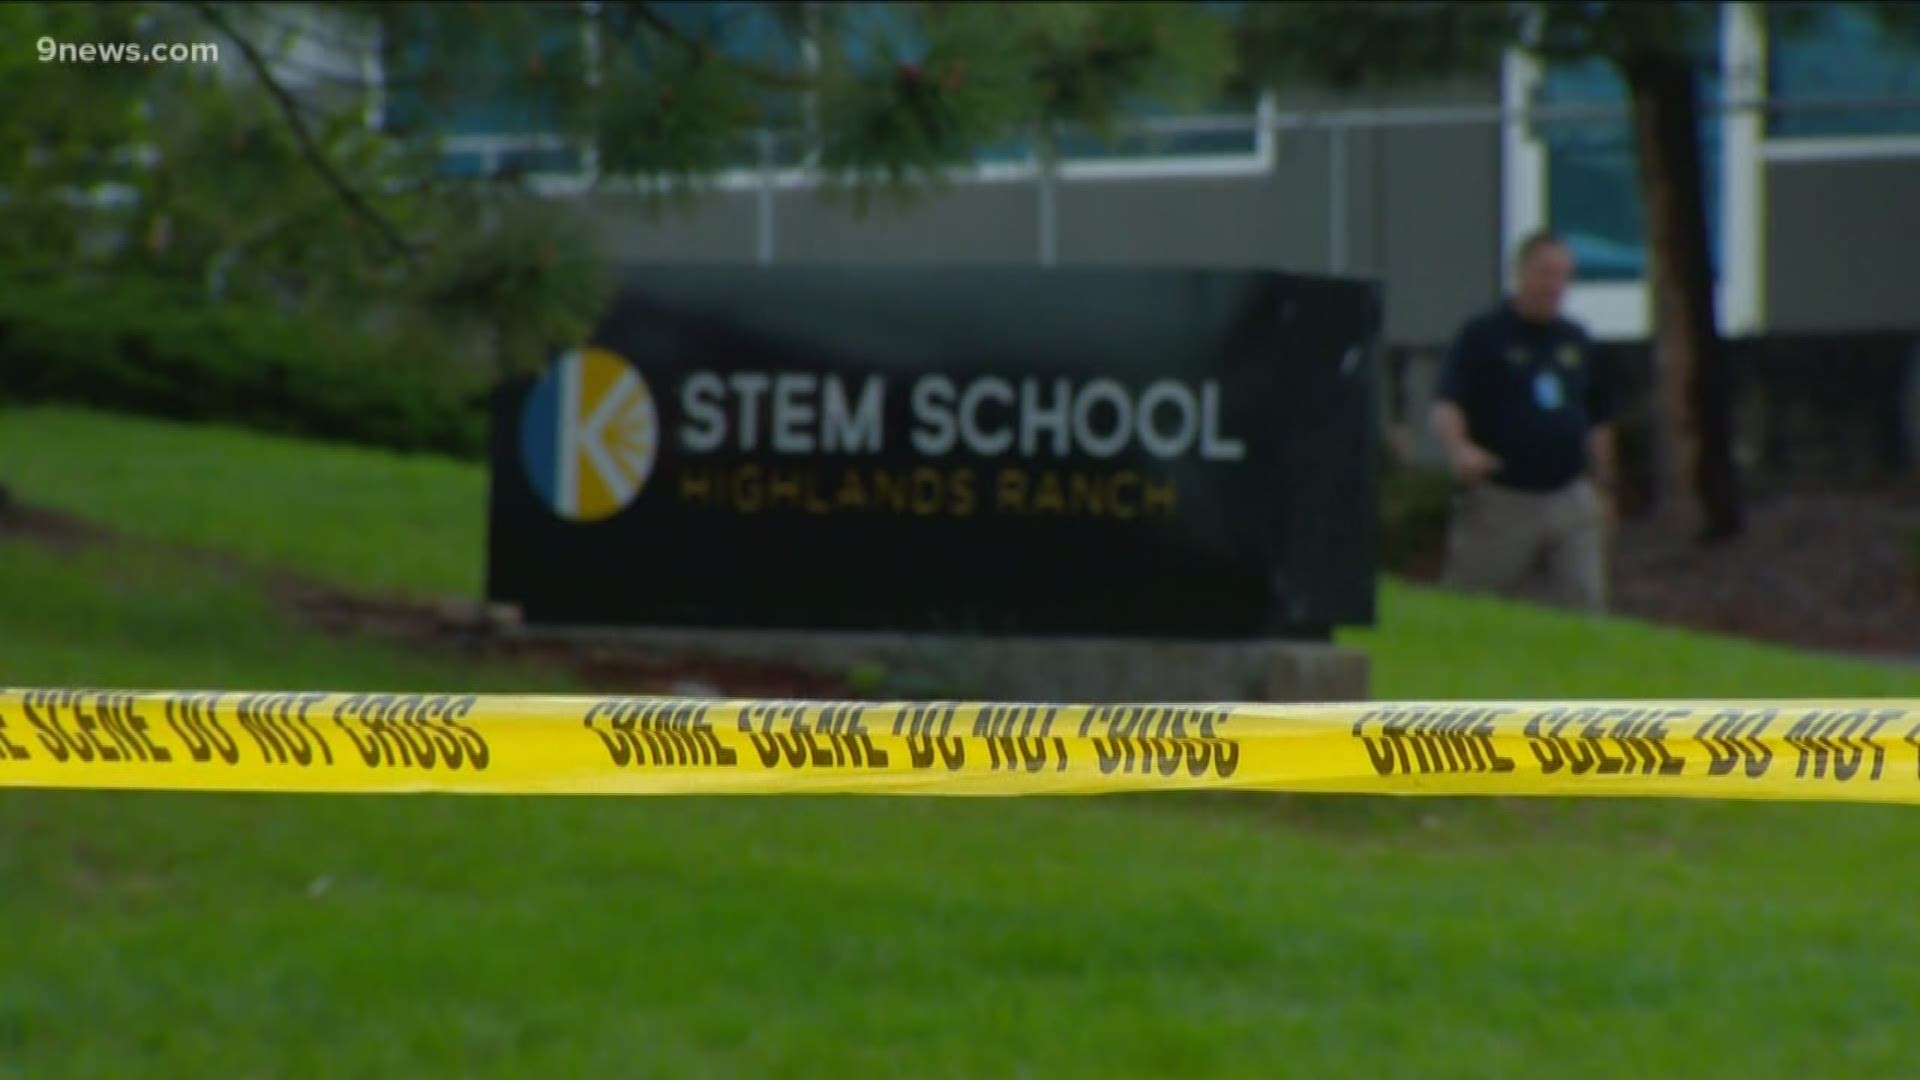 16-year-old Alec McKinney will be tried as an adult for his role in the shooting at STEM School Highlands Ranch last May.